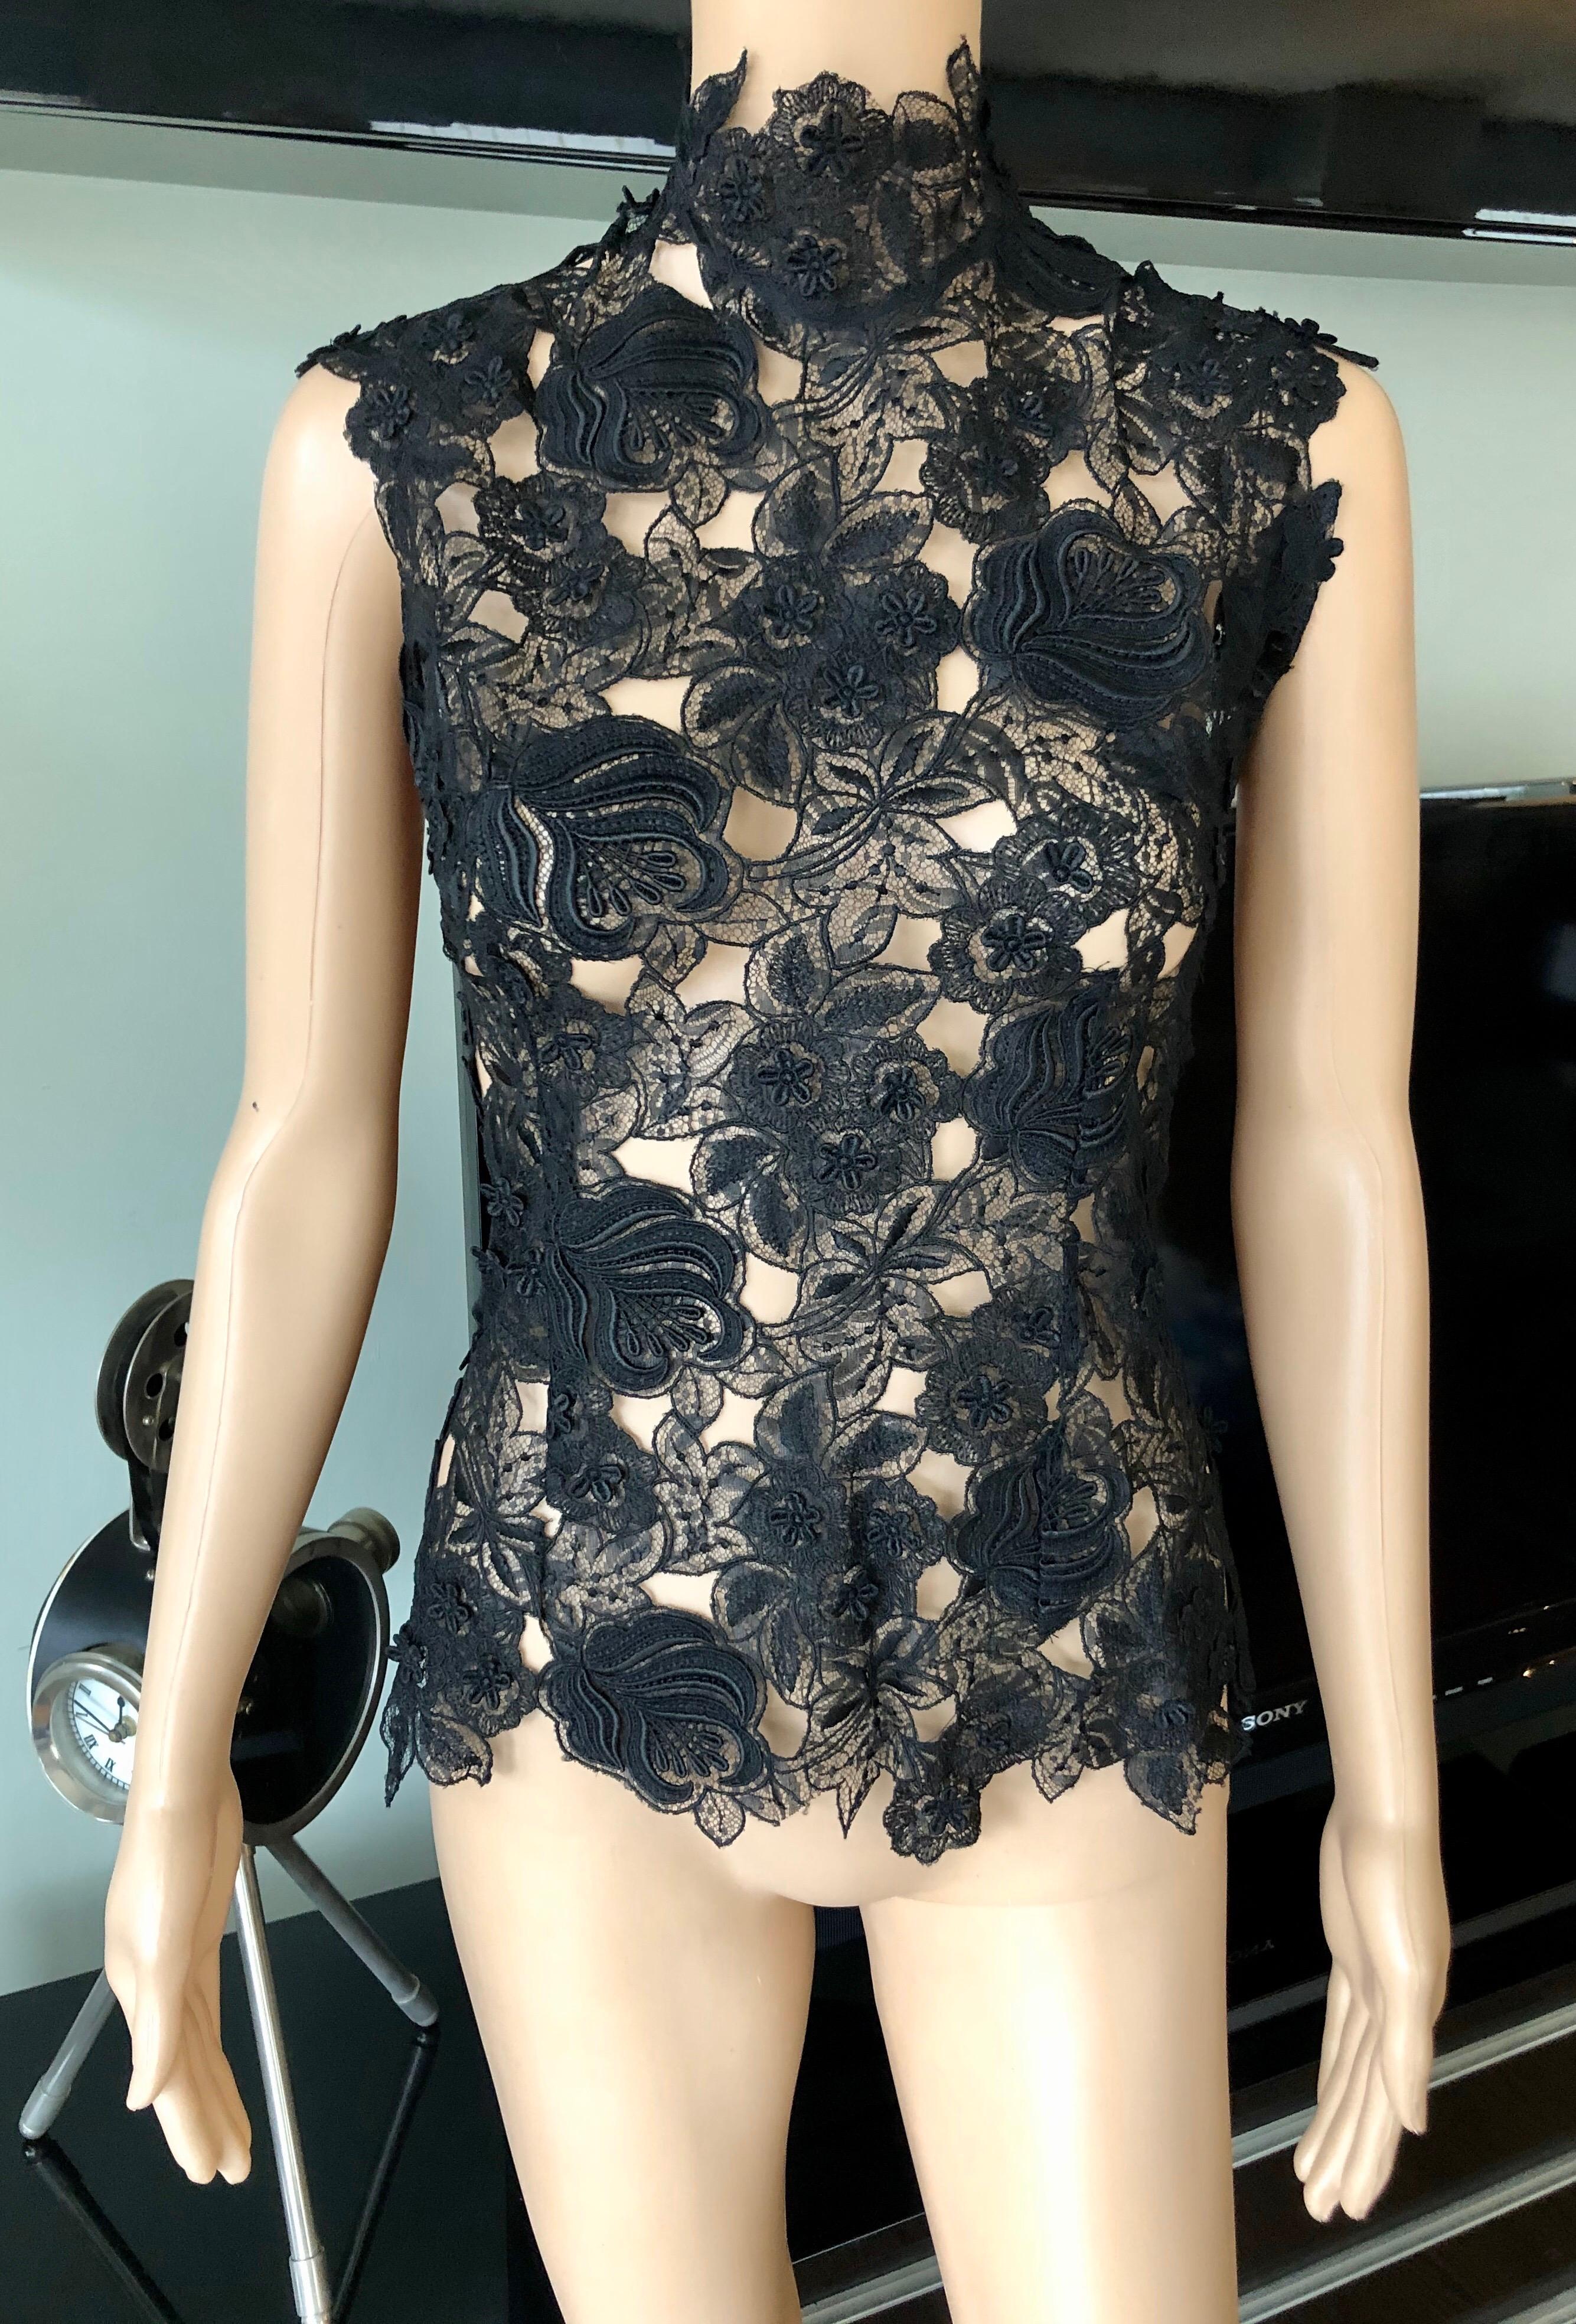 Thierry Mugler Vintage Lace Mock Neck Black Blouse Top FR 40

Thierry Mugler top featuring lace pattern, mock neck. and button closure at back.
